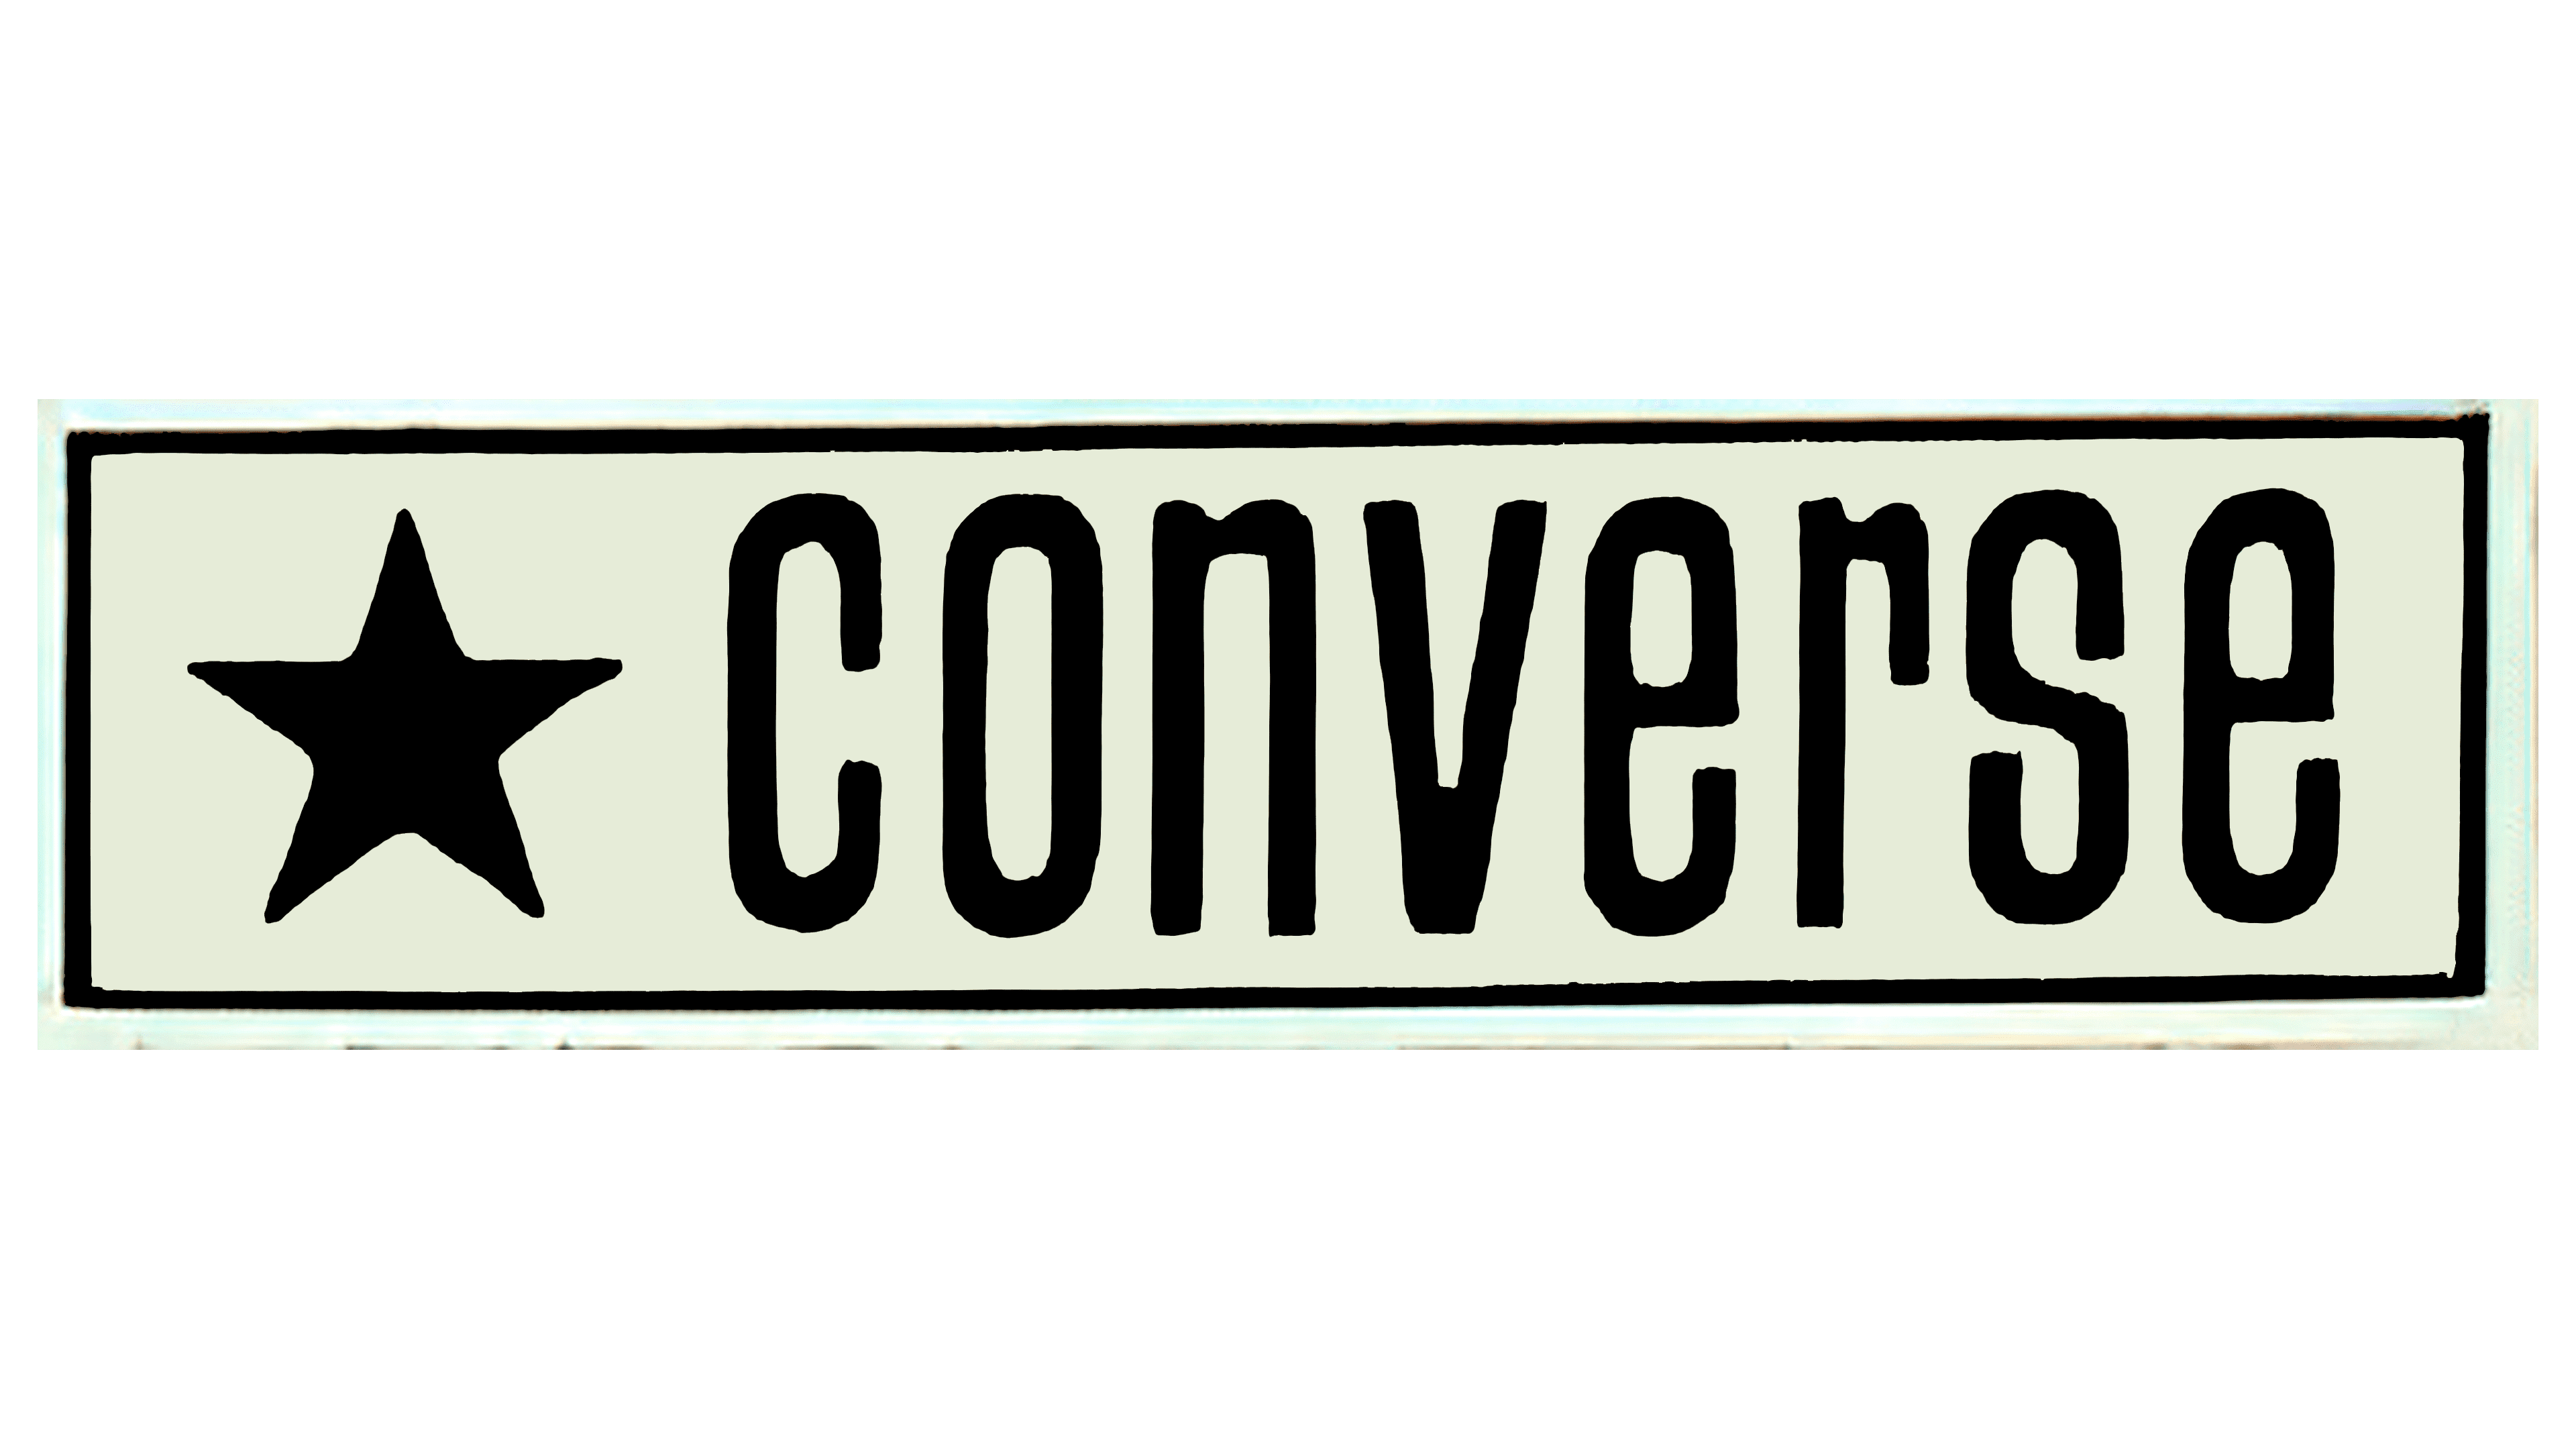 converse logo meaning